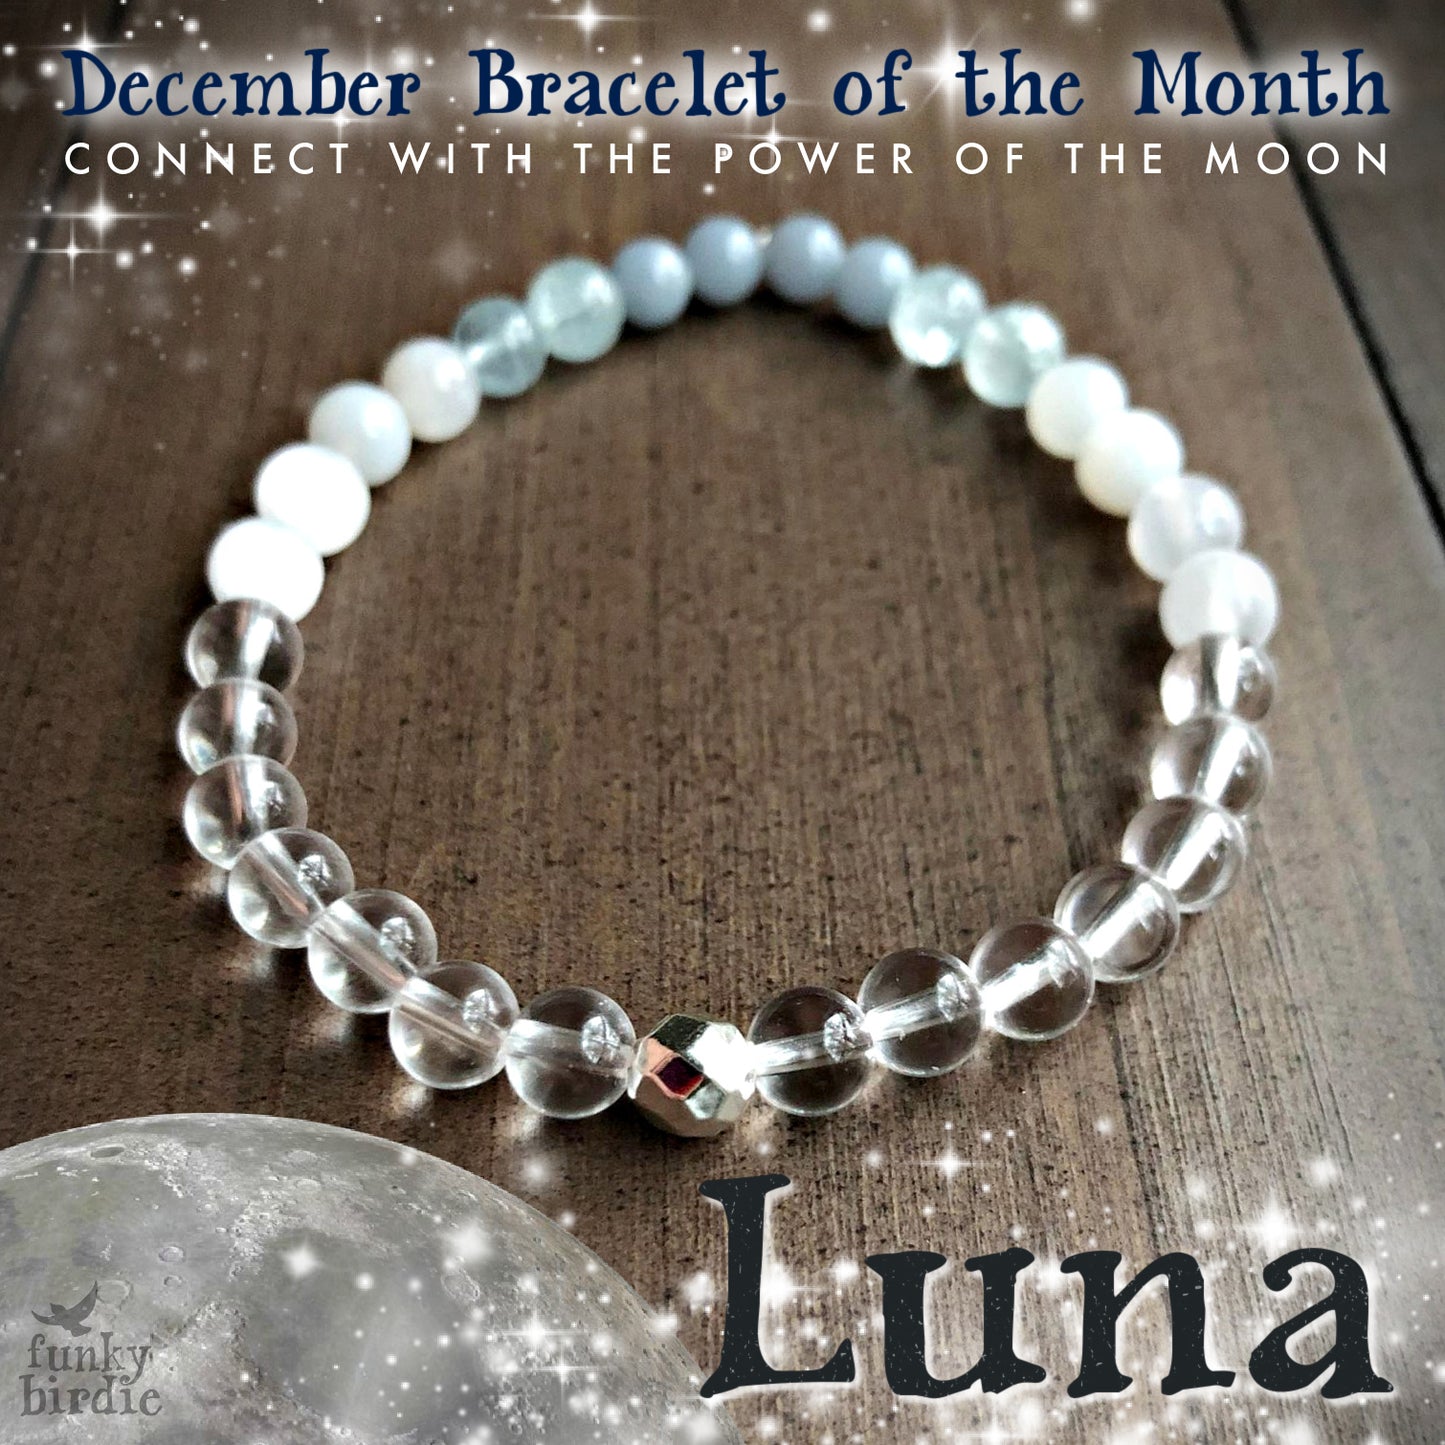 Breathe: September Bracelet of the Month & Subscription Box for Stress & Anxiety Relief